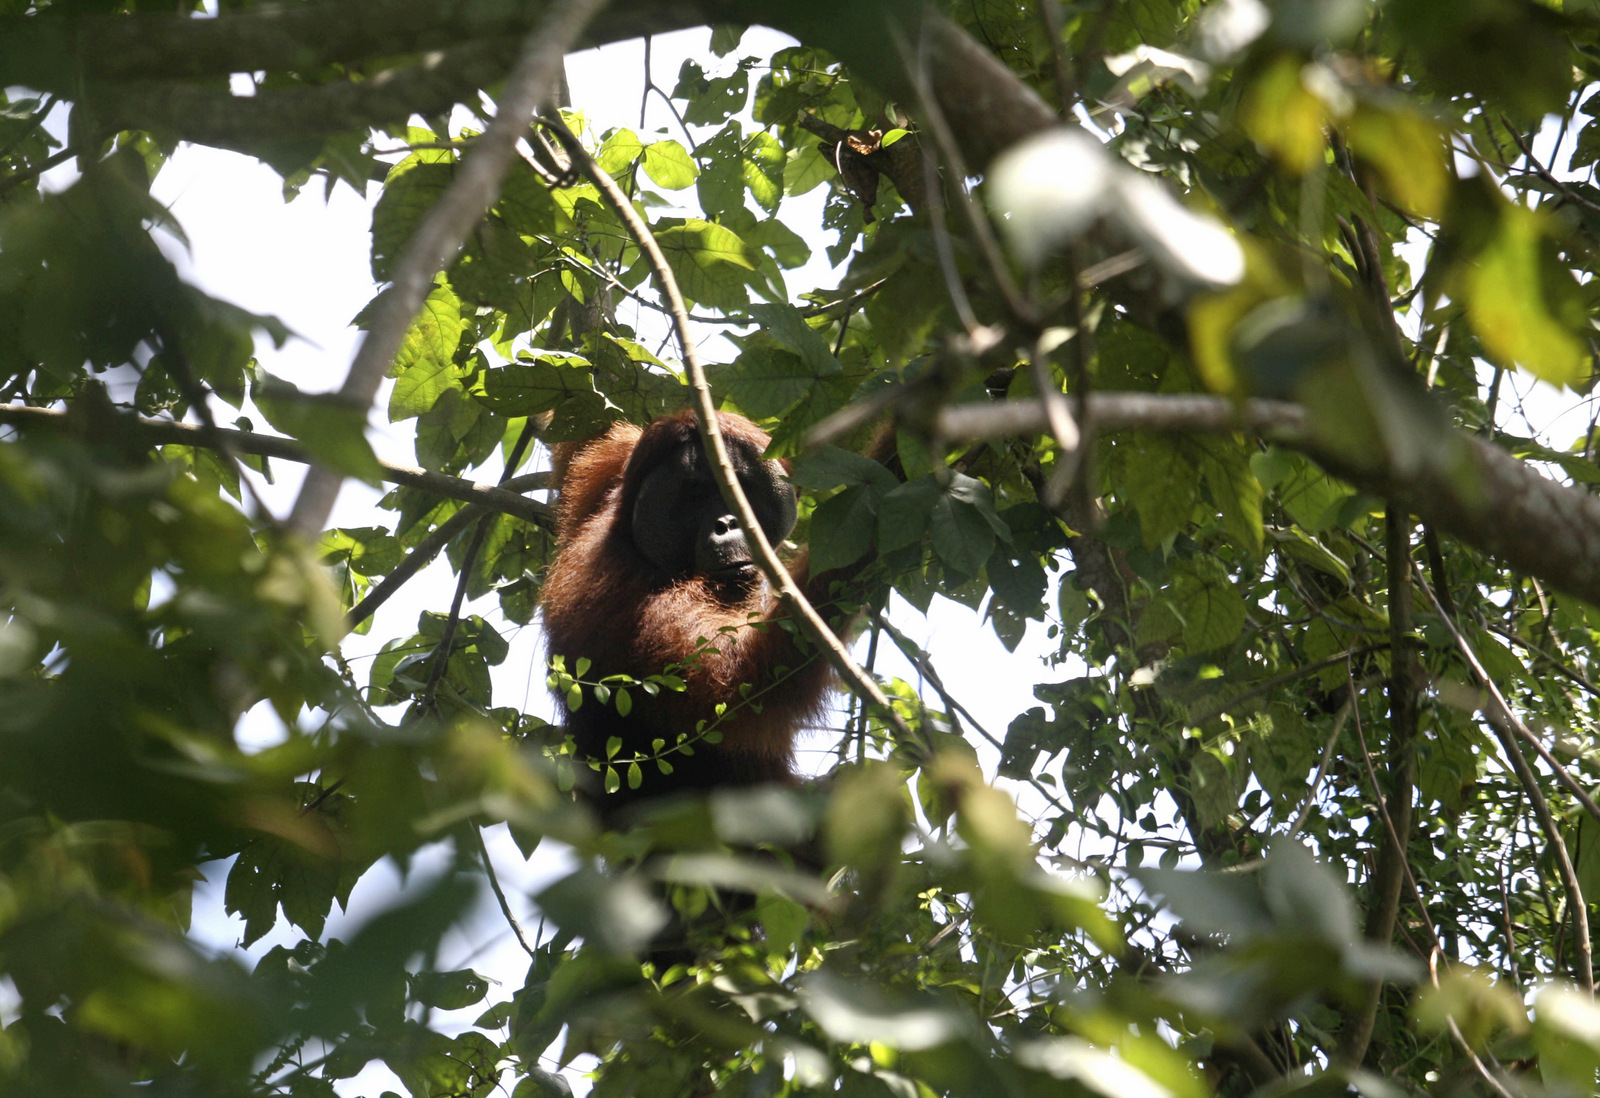 In this Thursday, Aug. 10, 2017 photo, an orangutan holds on the branch of a tree before being rescued and relocated from at a swath of destructed forest near a palm oil plantation at Tripa peat swamp in Aceh province, Indonesia. As demand for palm oil soars, plantations are expanding and companies drain the swamp, clear the forest of its native trees, and often setting illegal fires which in turn robs orangutans and other endangered species of their habitats, leaving the animals marooned on small swaths of forest, boxed-in on all sides by plantations. (AP Photo/Binsar Bakkara)